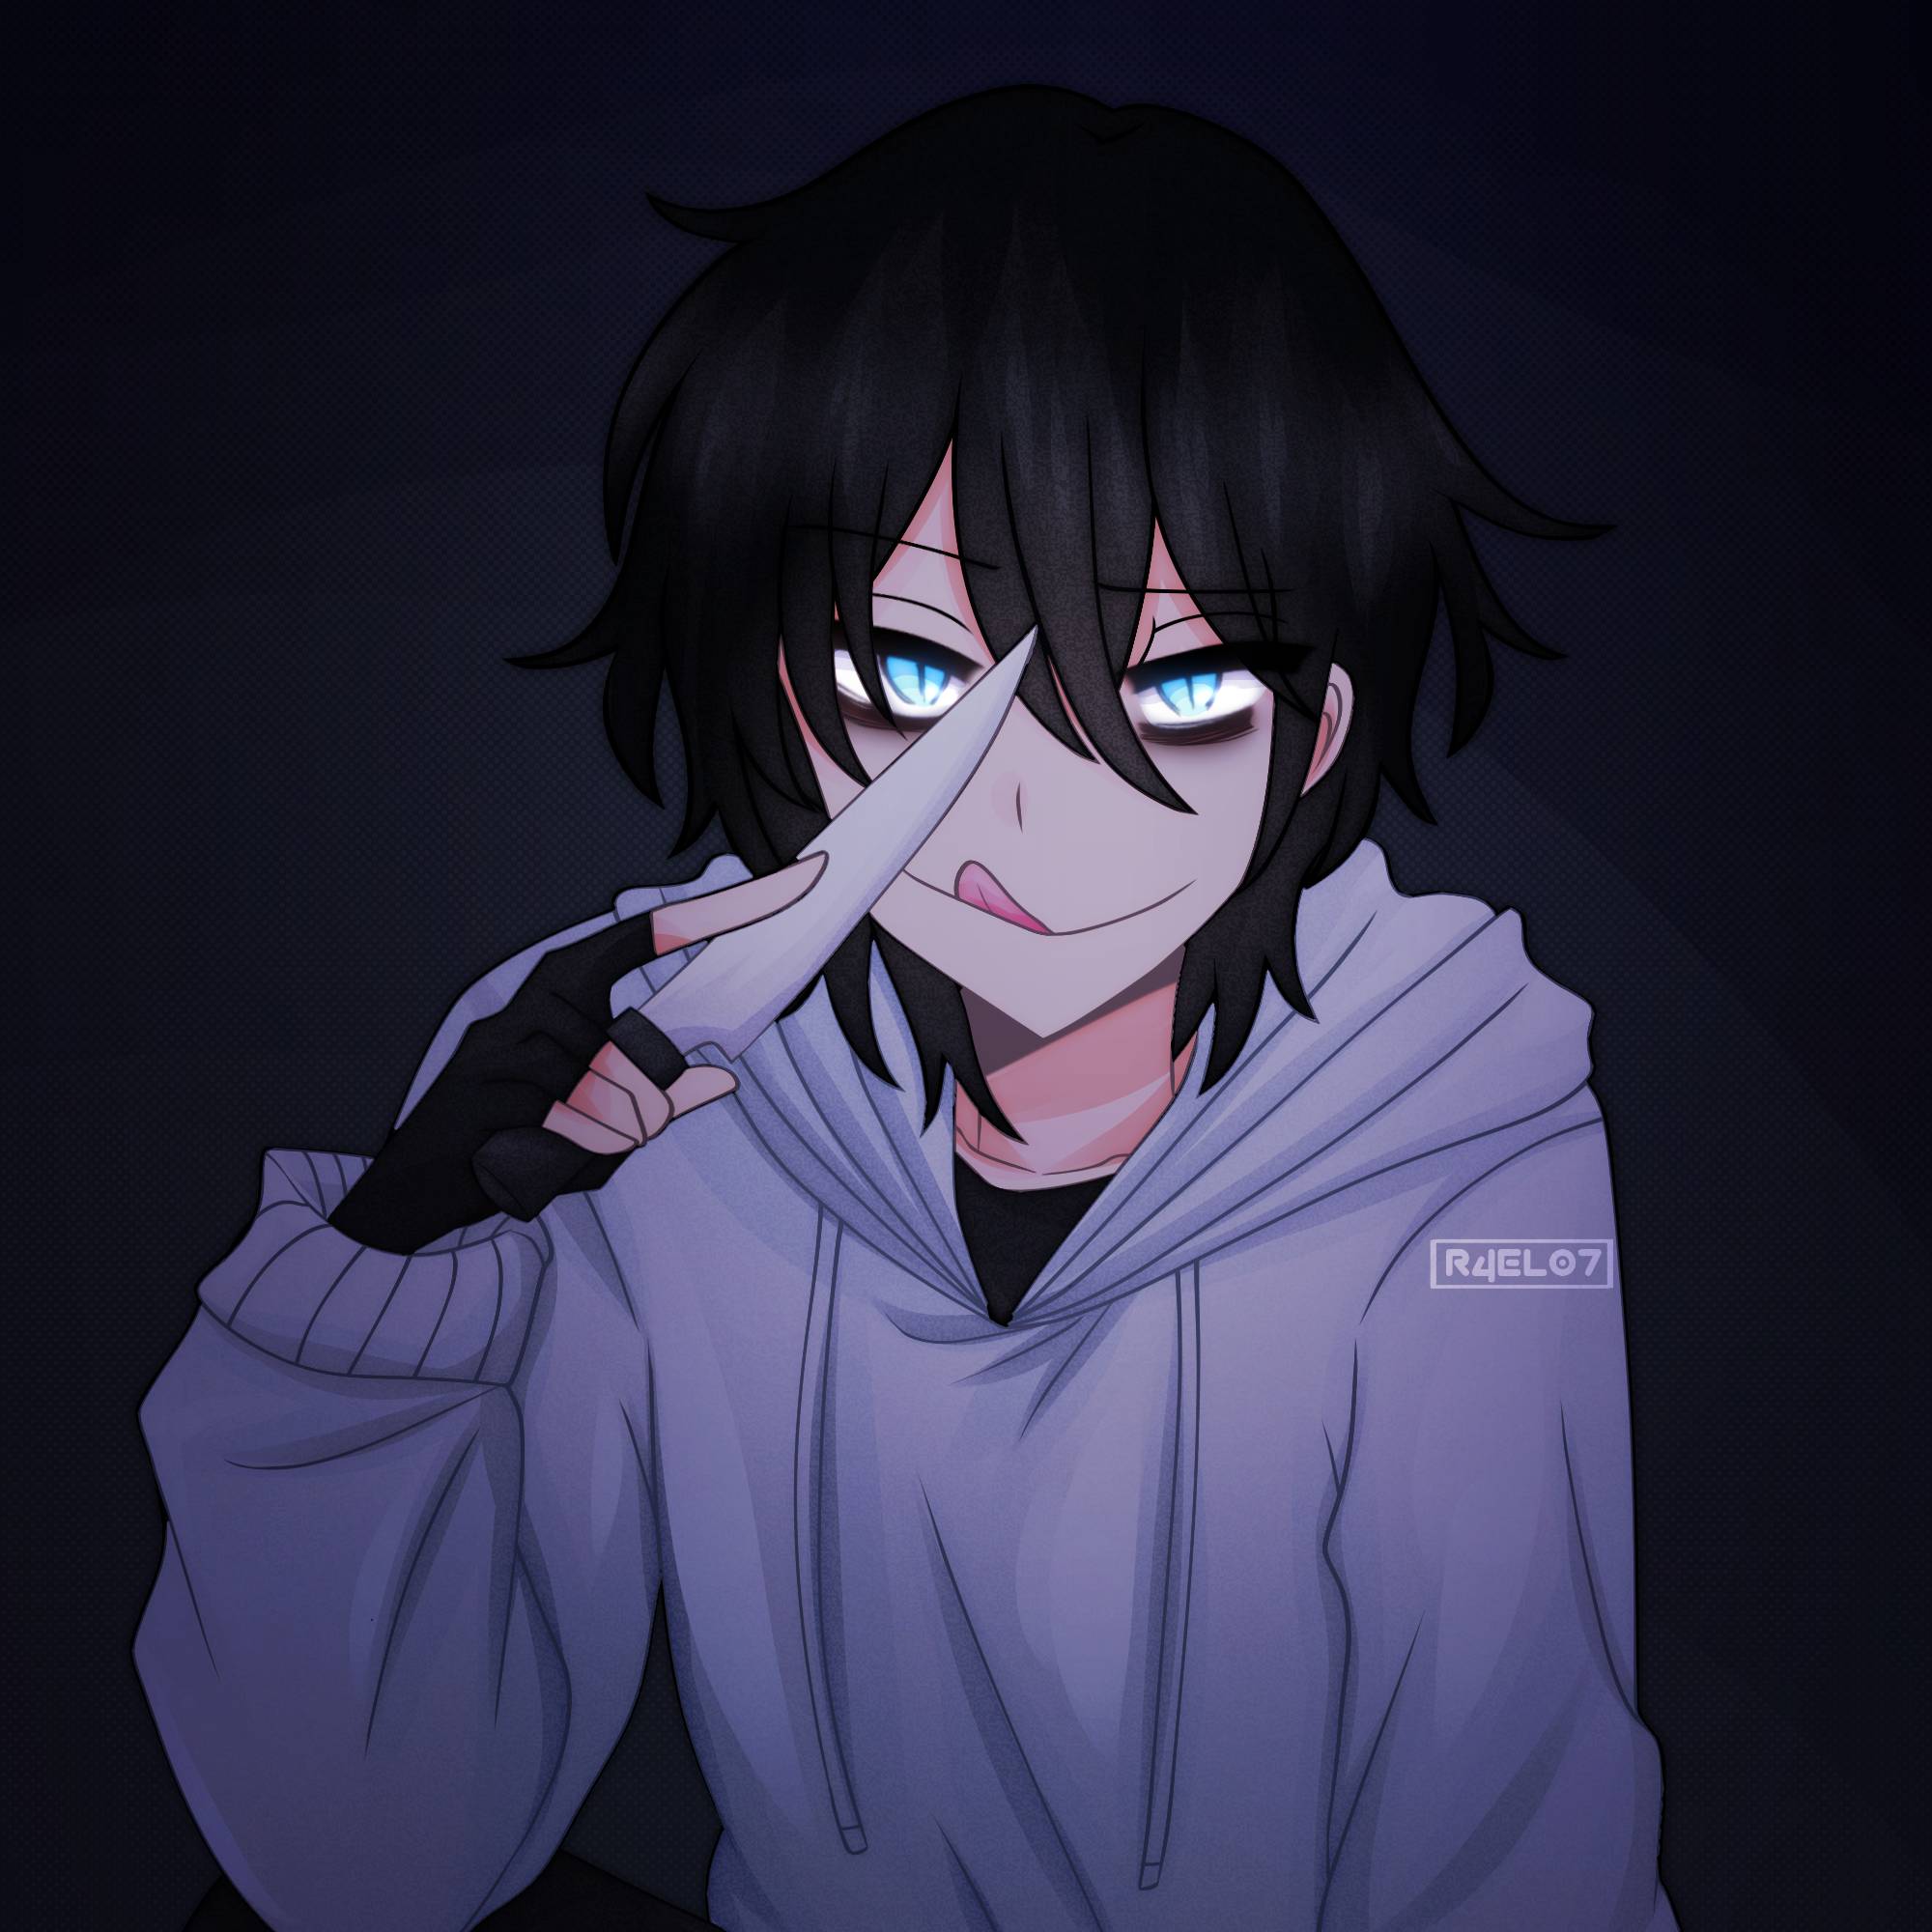 Jeff The Killer Anime Character by CaitlinTheLucario on DeviantArt